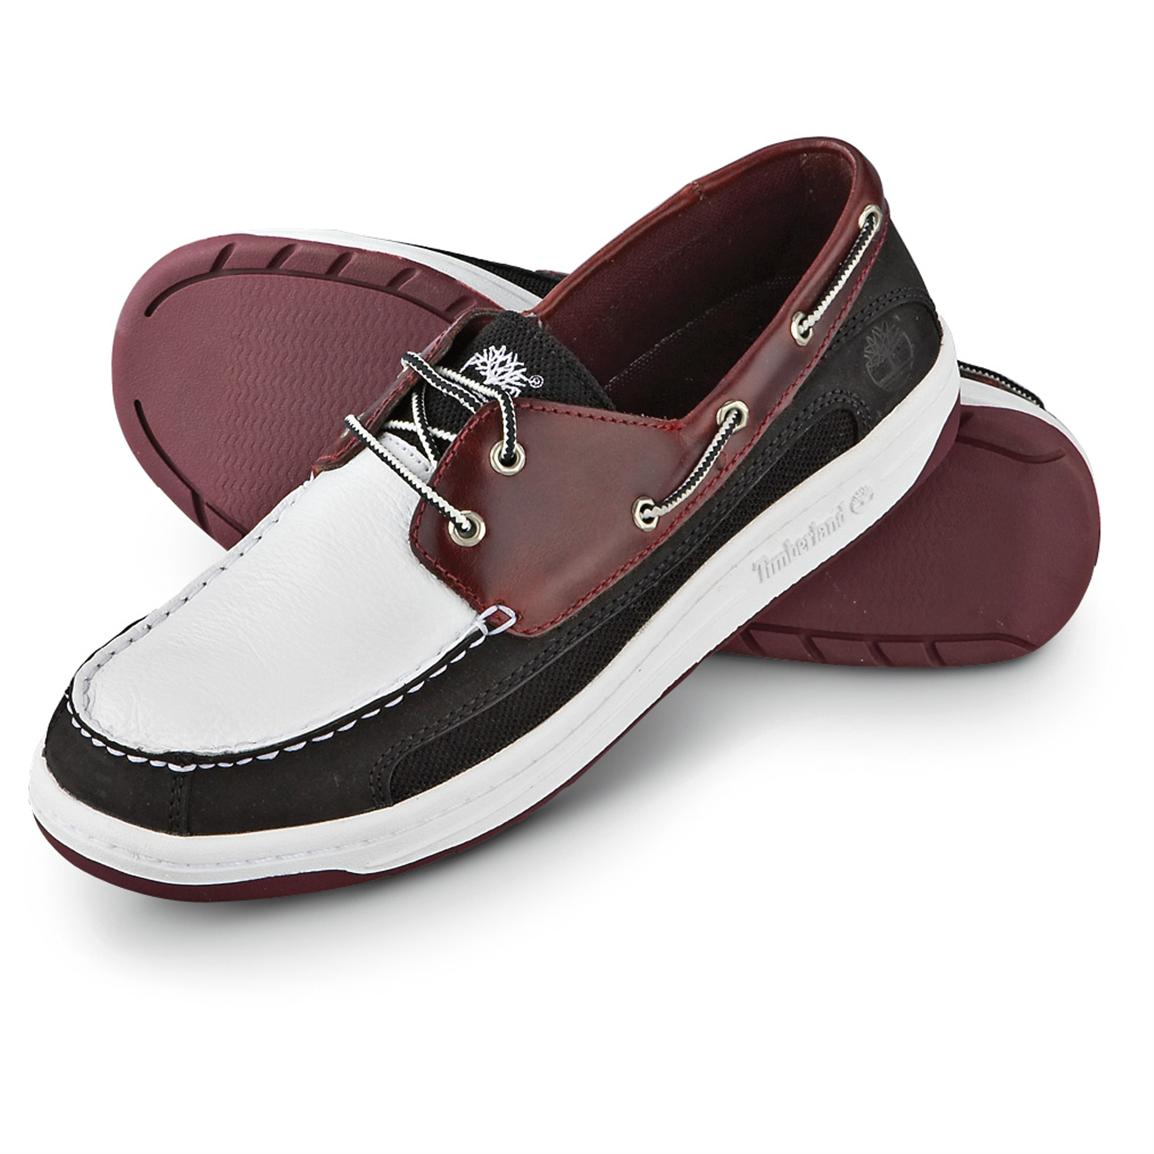 white timberland boat shoes buy clothes 